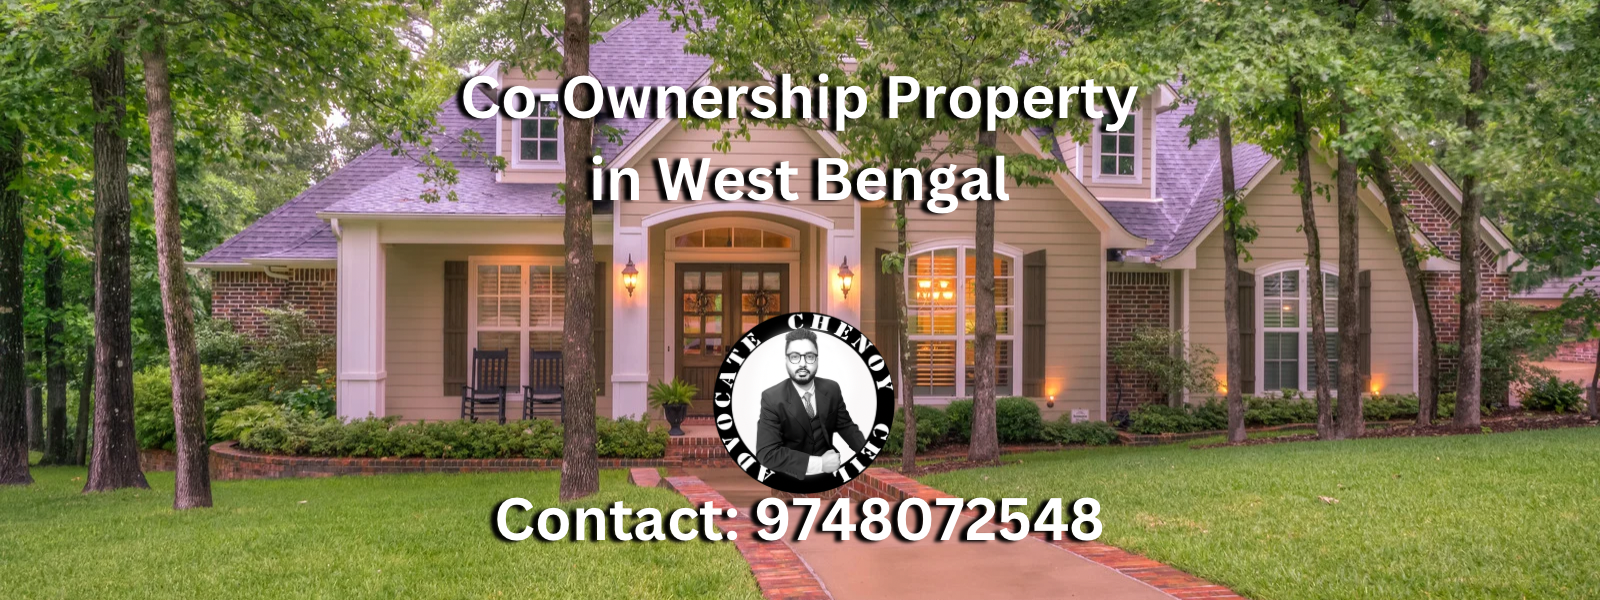 Co-ownership Property in West Bengal